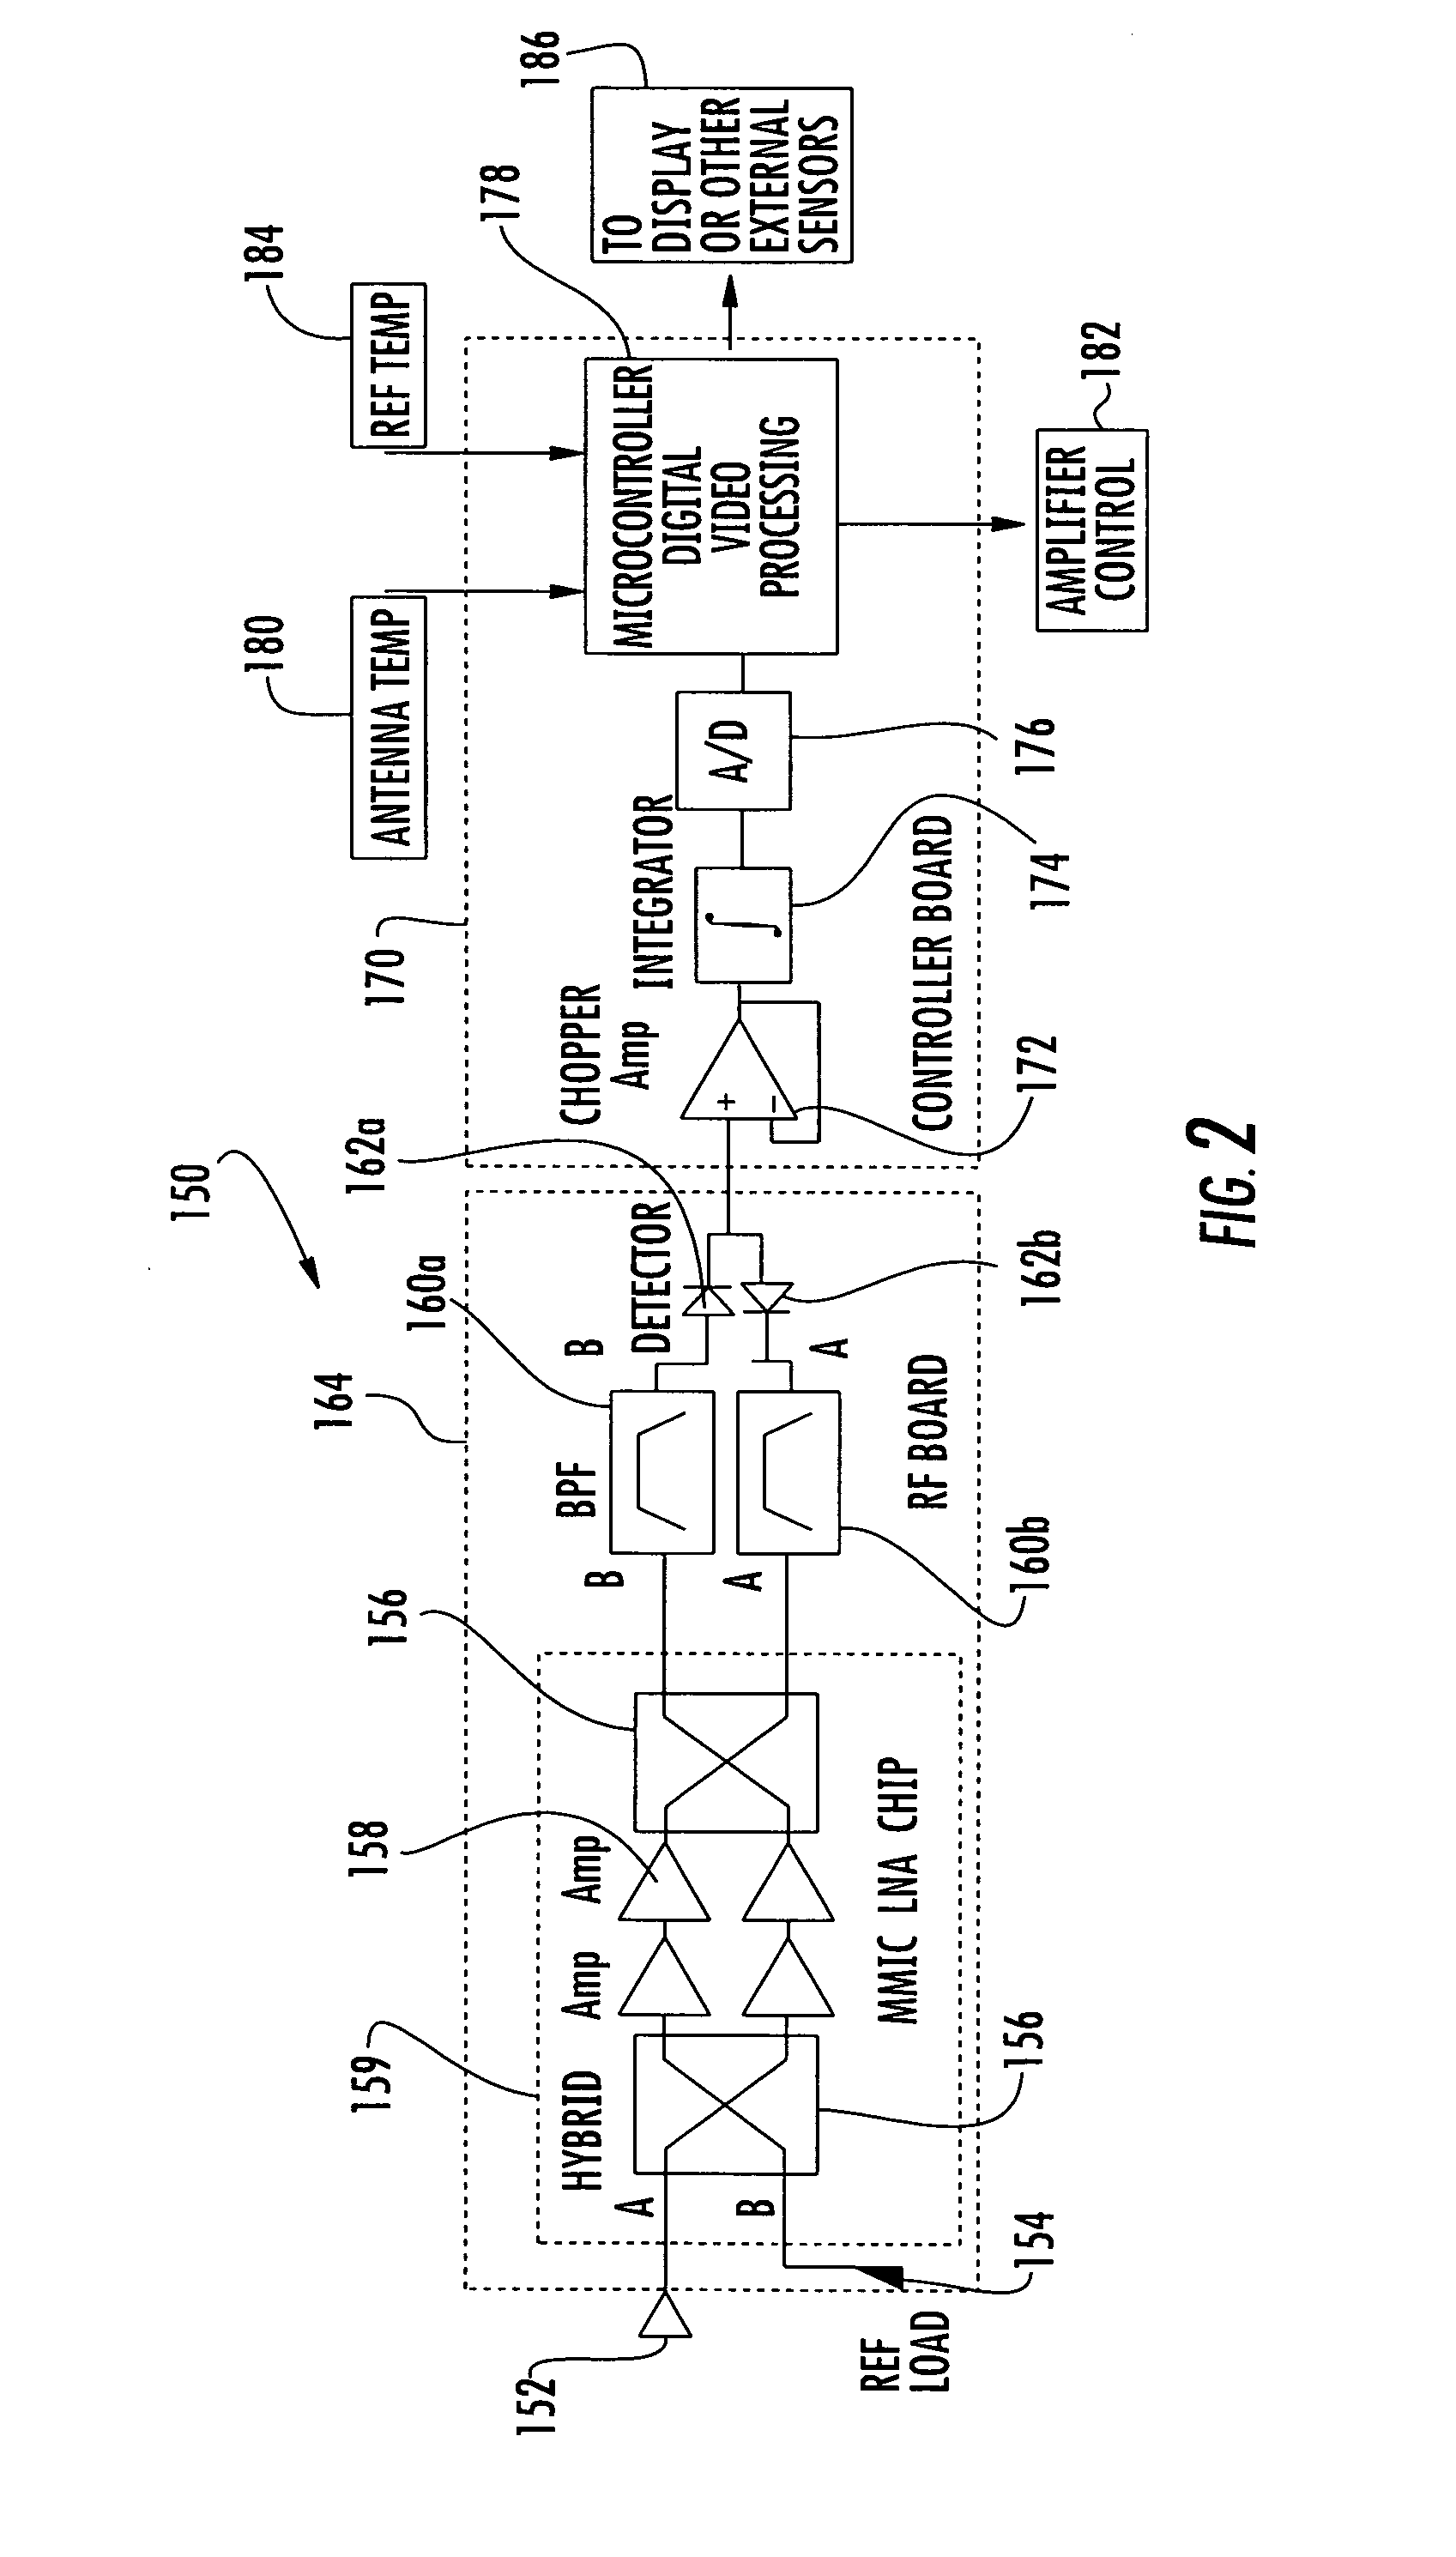 Radiometer measurement linearization system and method